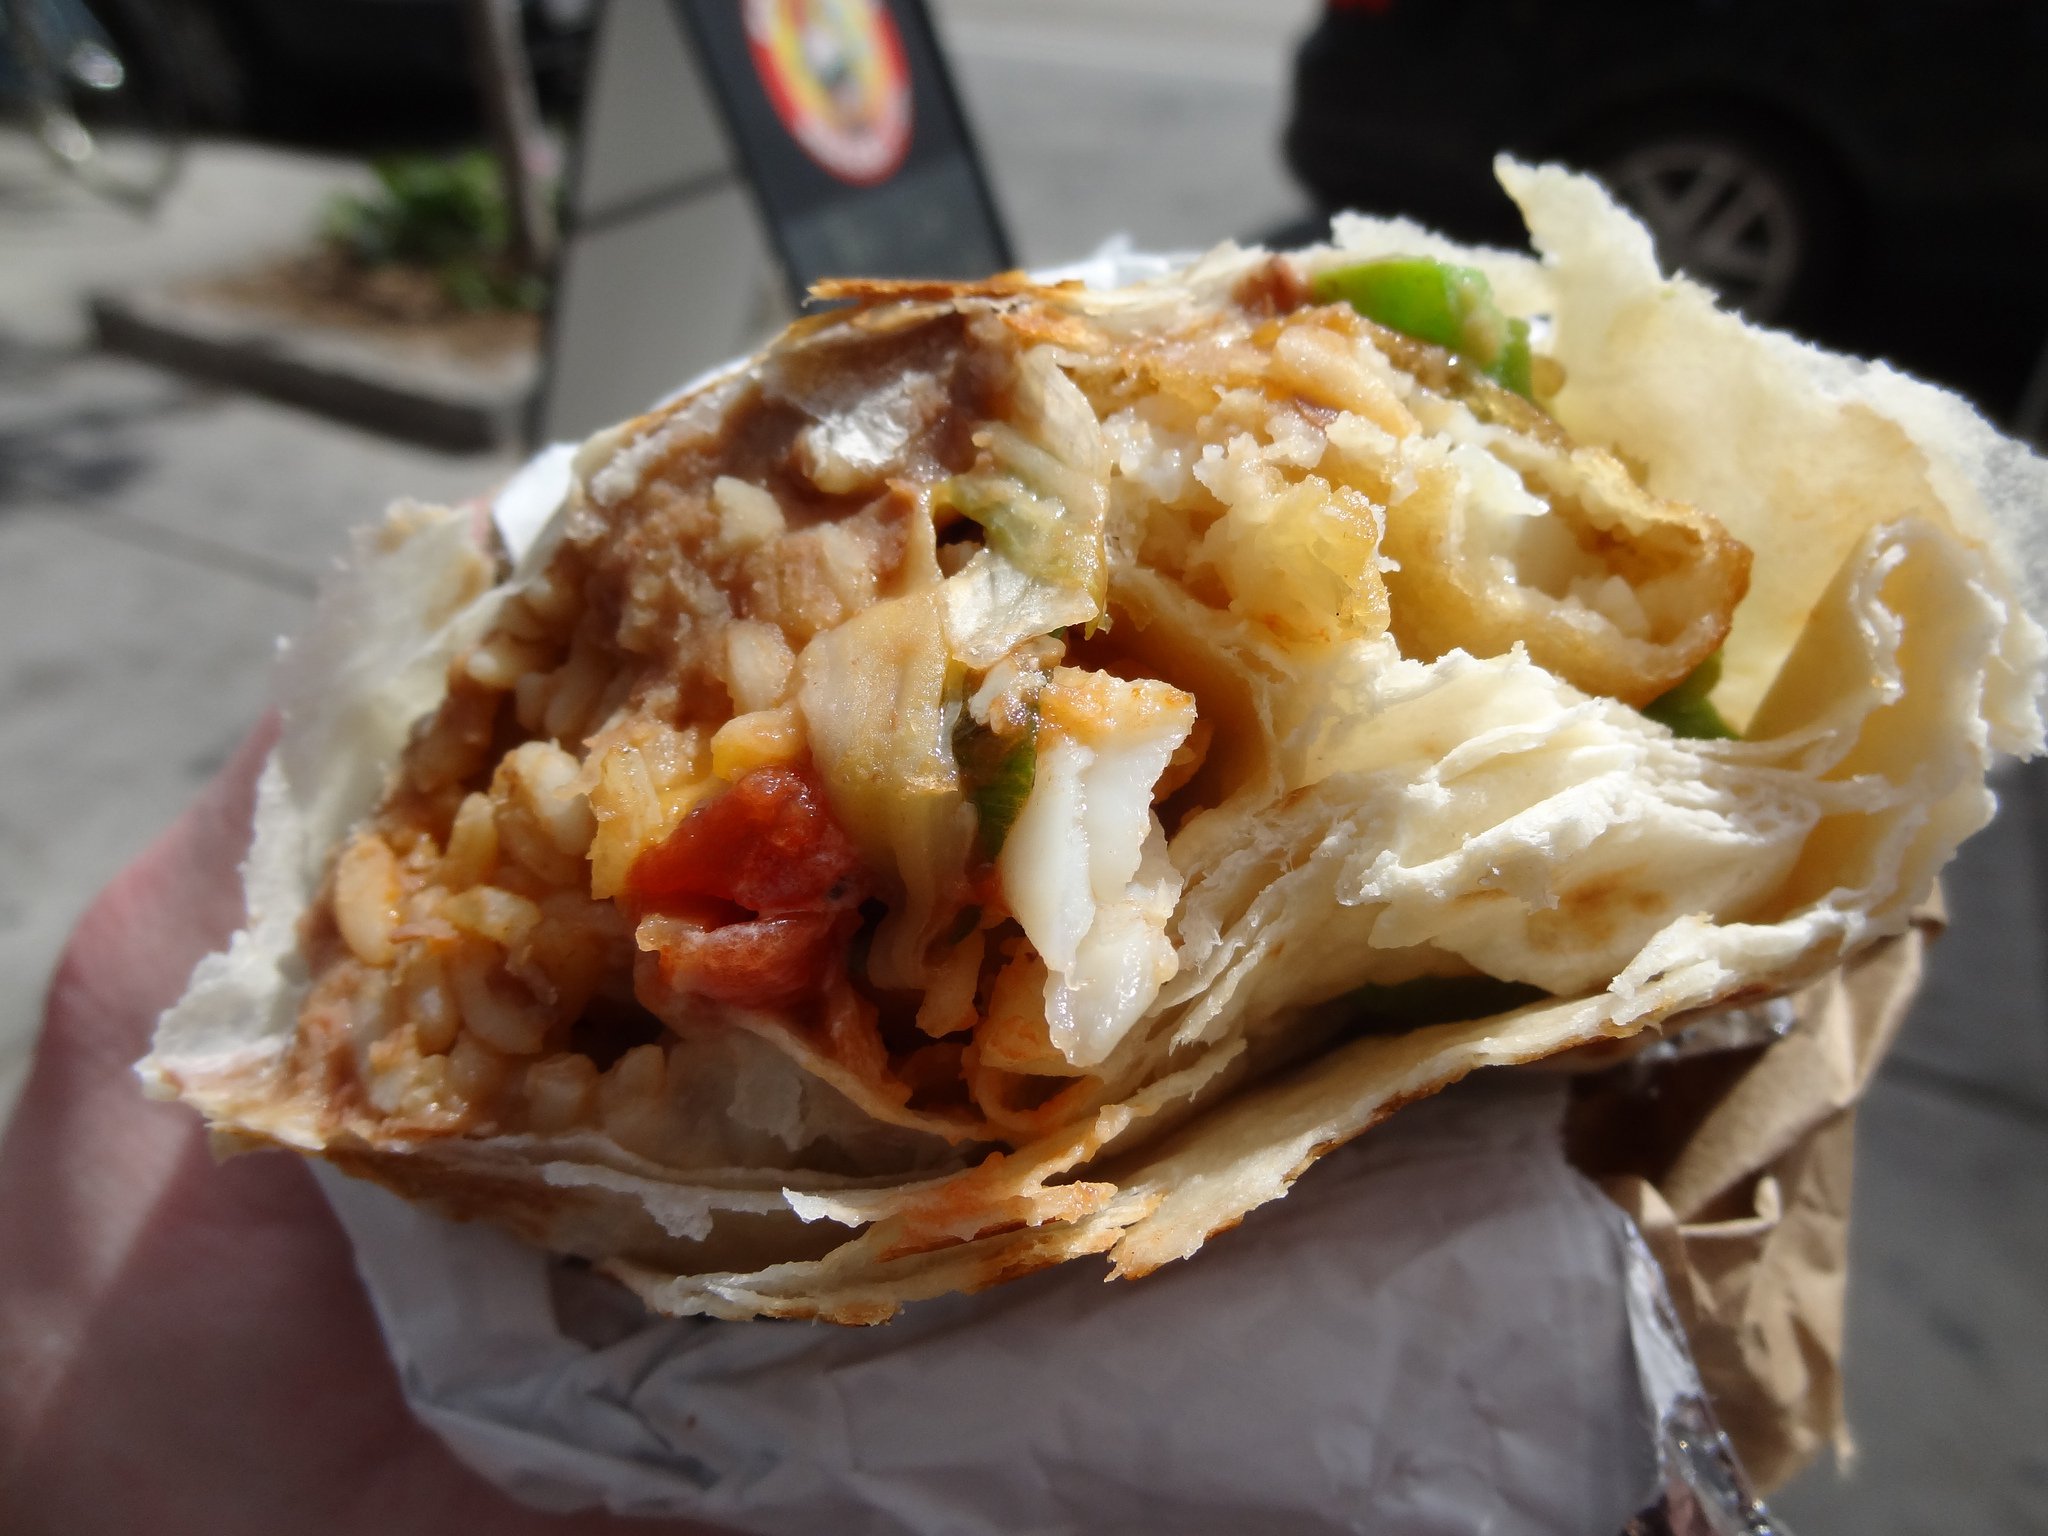 National Burrito Day - A Guide to the 9 Best Burritos in Toronto